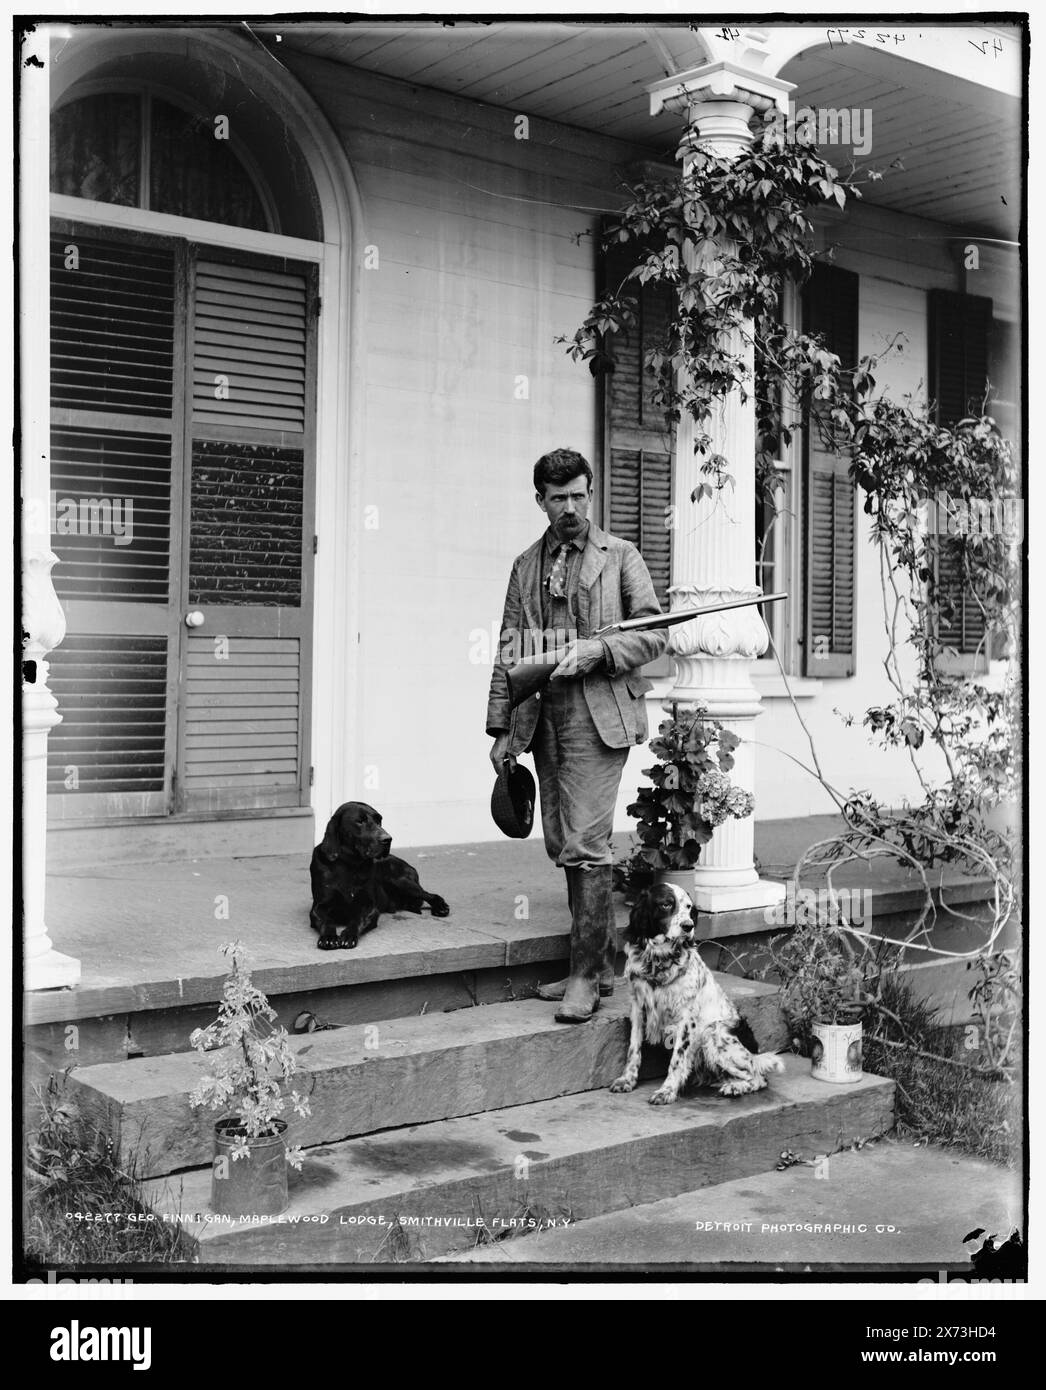 George Finnigan, Maplewood Lodge, Smithville Flats, N.Y., Date from jacket., Negative broken., '42' on negative., Detroit Publishing Co. no. 042277., Gift; State Historical Society of Colorado; 1949,  Porches. , Hotels. , Hunting dogs. , United States, New York (State), Smithville Flats. Stock Photo